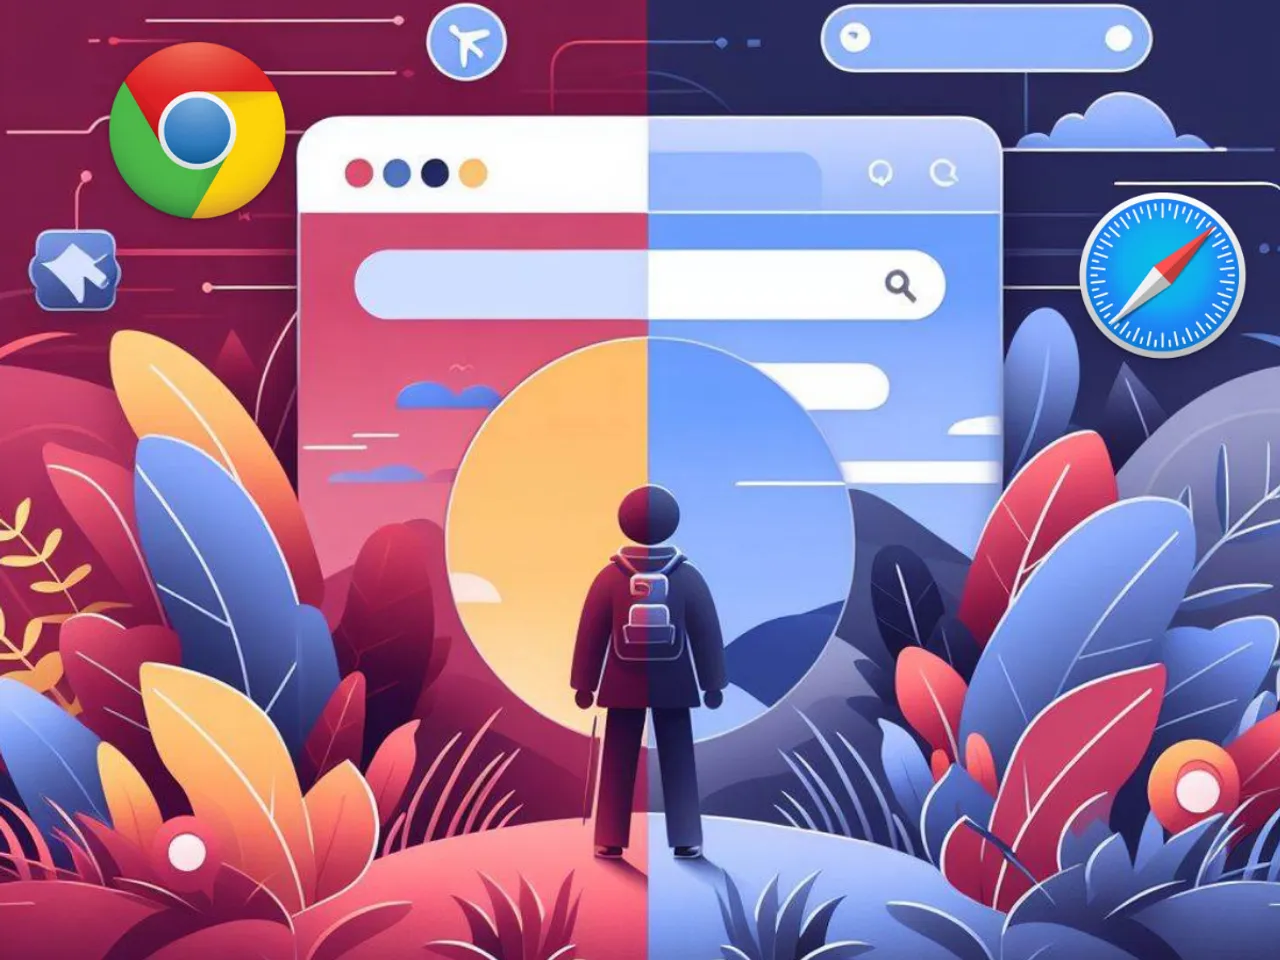 Safari vs. Chrome: Which browser is better for iPhone and Mac